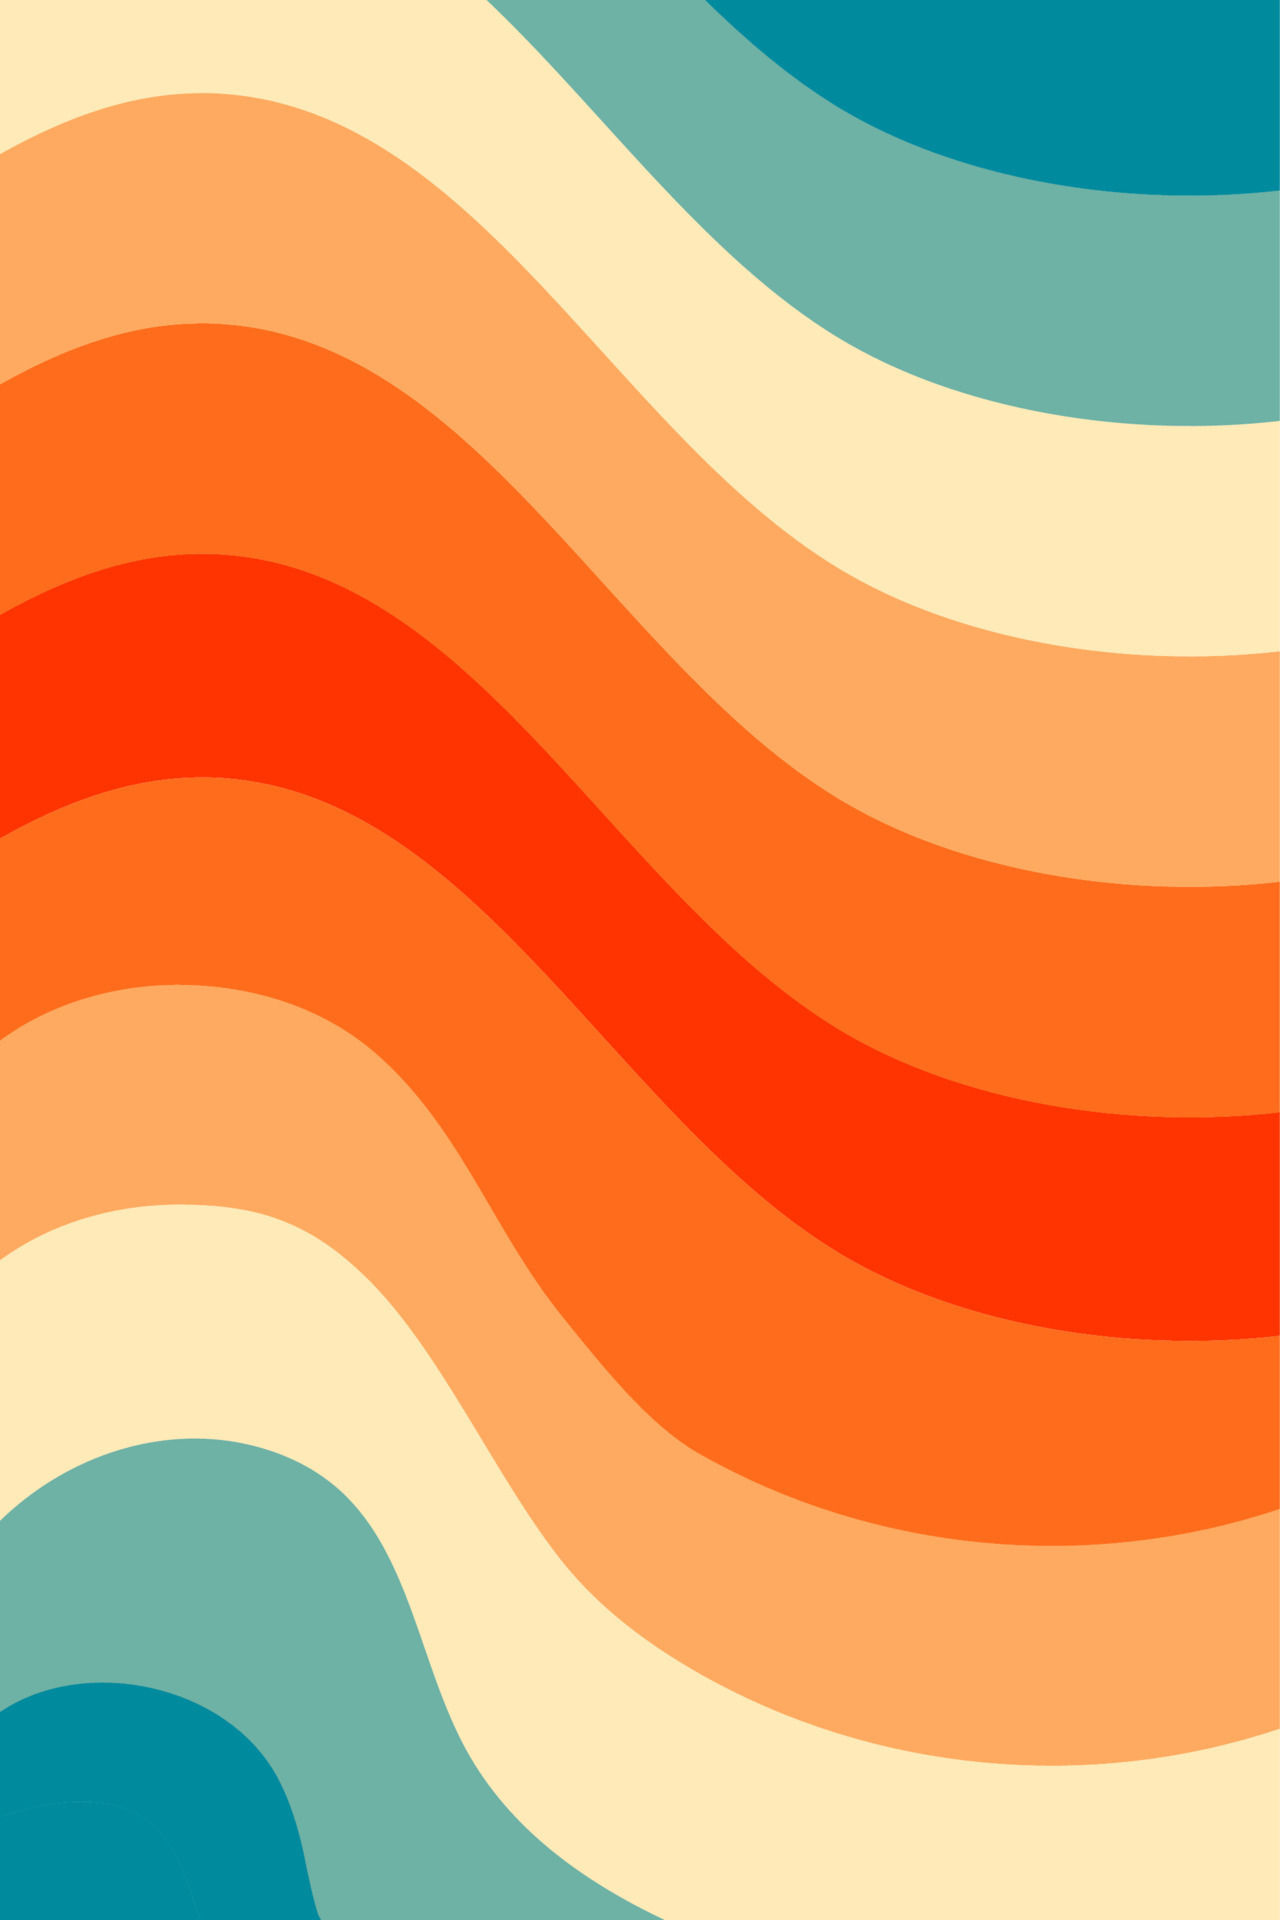 Groovy Retro Abstract Art, 70s 80s Aesthetic, Background For Social Media, Stories, Wallpaper. Pastel Summer, Sunset Waves, Line. Vector Simple Illustration